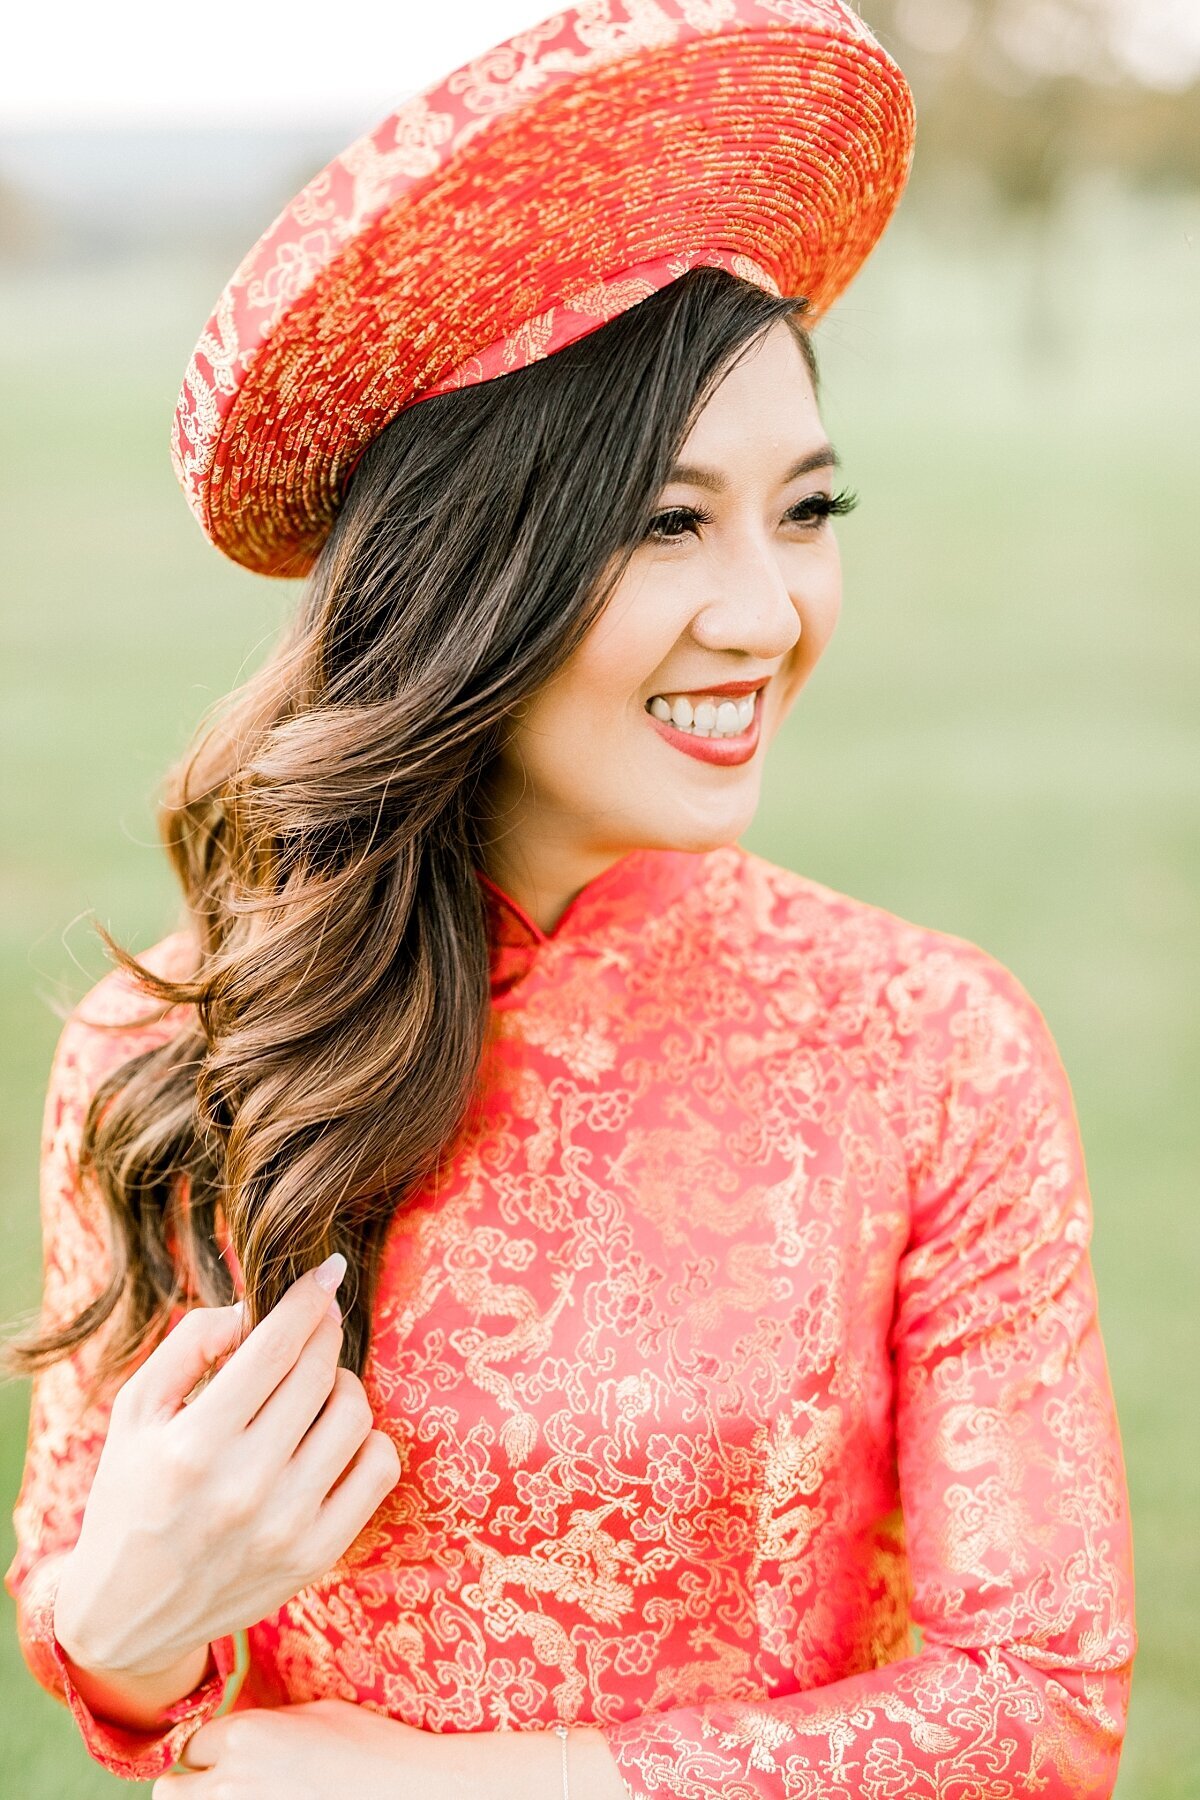 Vietnamese Bride in red traditional clothing